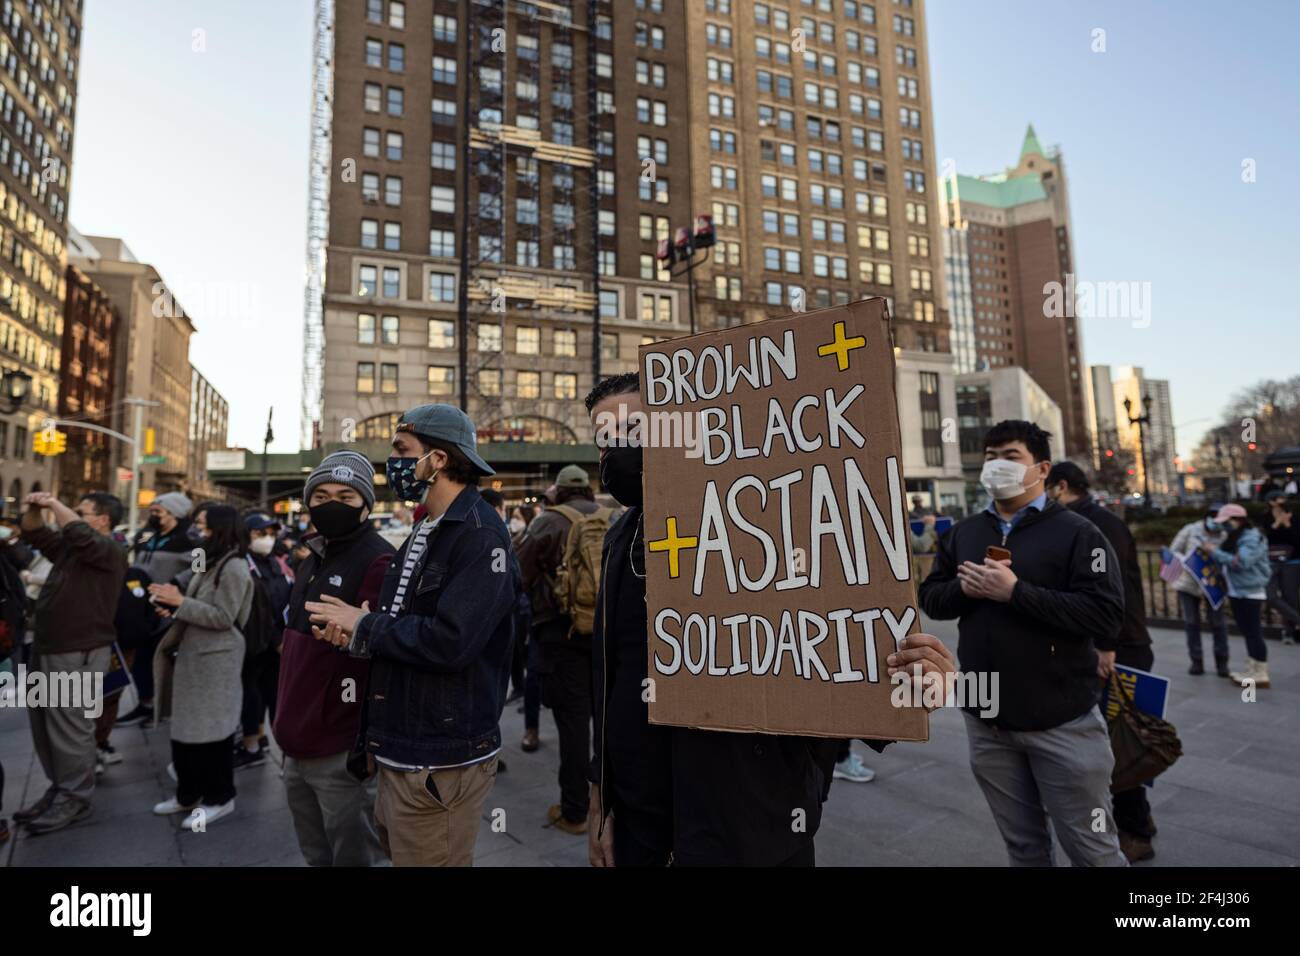 Brooklyn, New York, USA. 21 March 2021 Man in crowd holds sign calling for brown, black and Asian solidarity during rally against violence and discrimination after recent attacks against Asian-Americans in New York City and across the U.S. during the COVID-19 pandemic. Credit: Joseph Reid/Alamy Live News Stock Photo